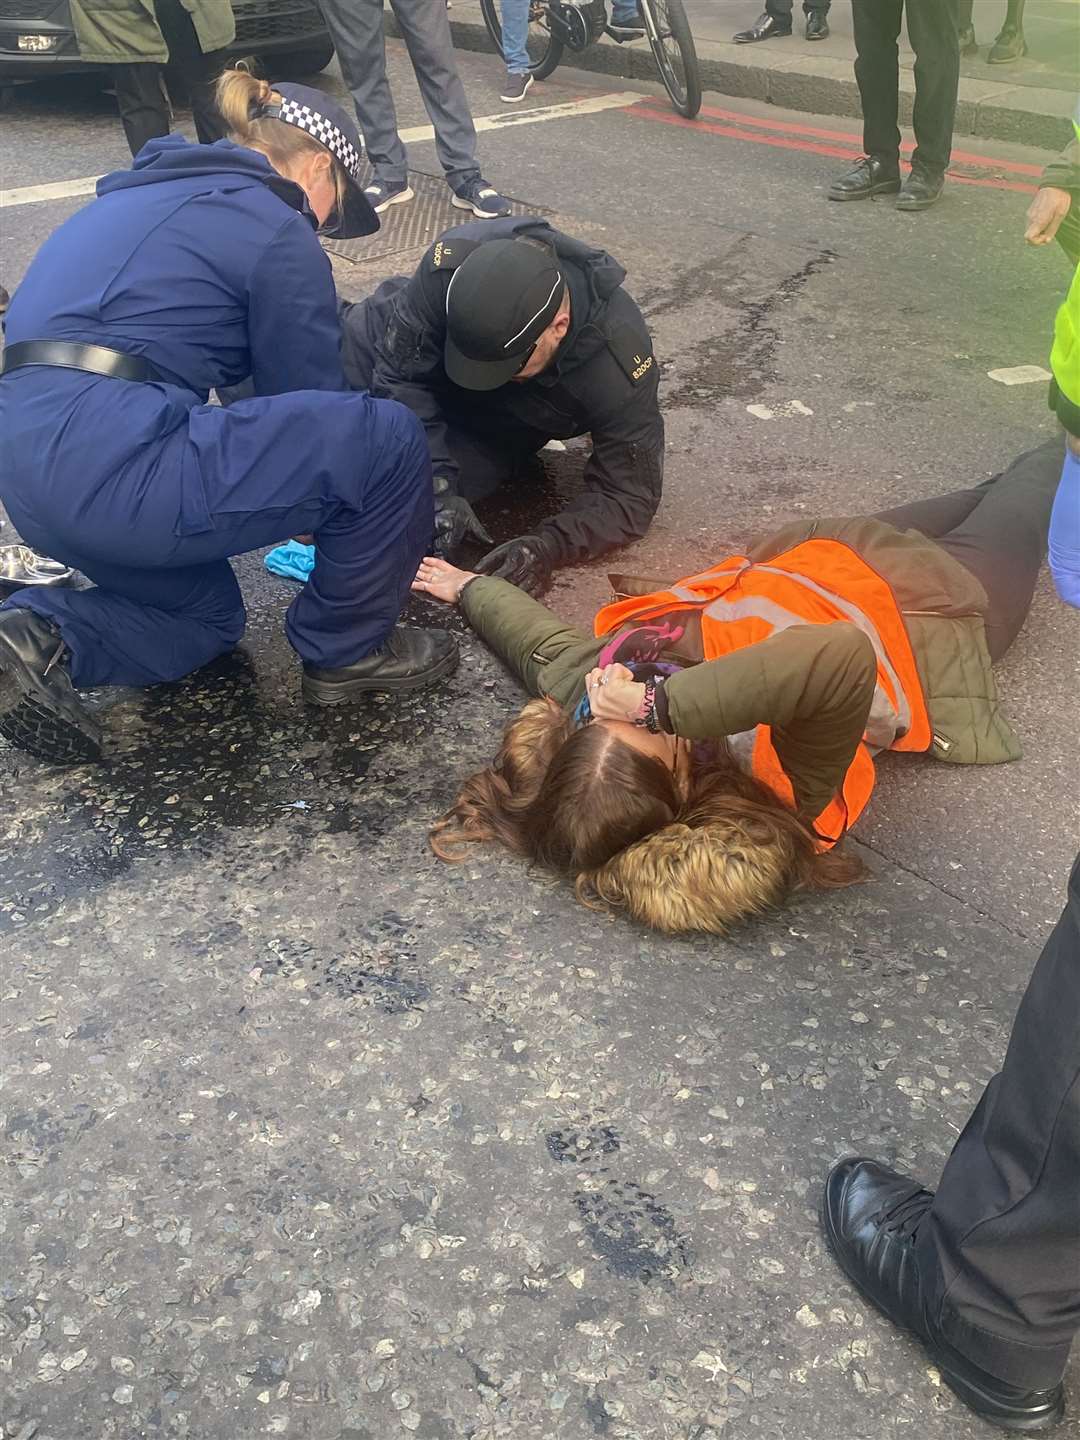 Metropolitan Police officers work to release a woman who has glued herself to the carriageway in Bishopsgate (Sophie Corcoran/PA)